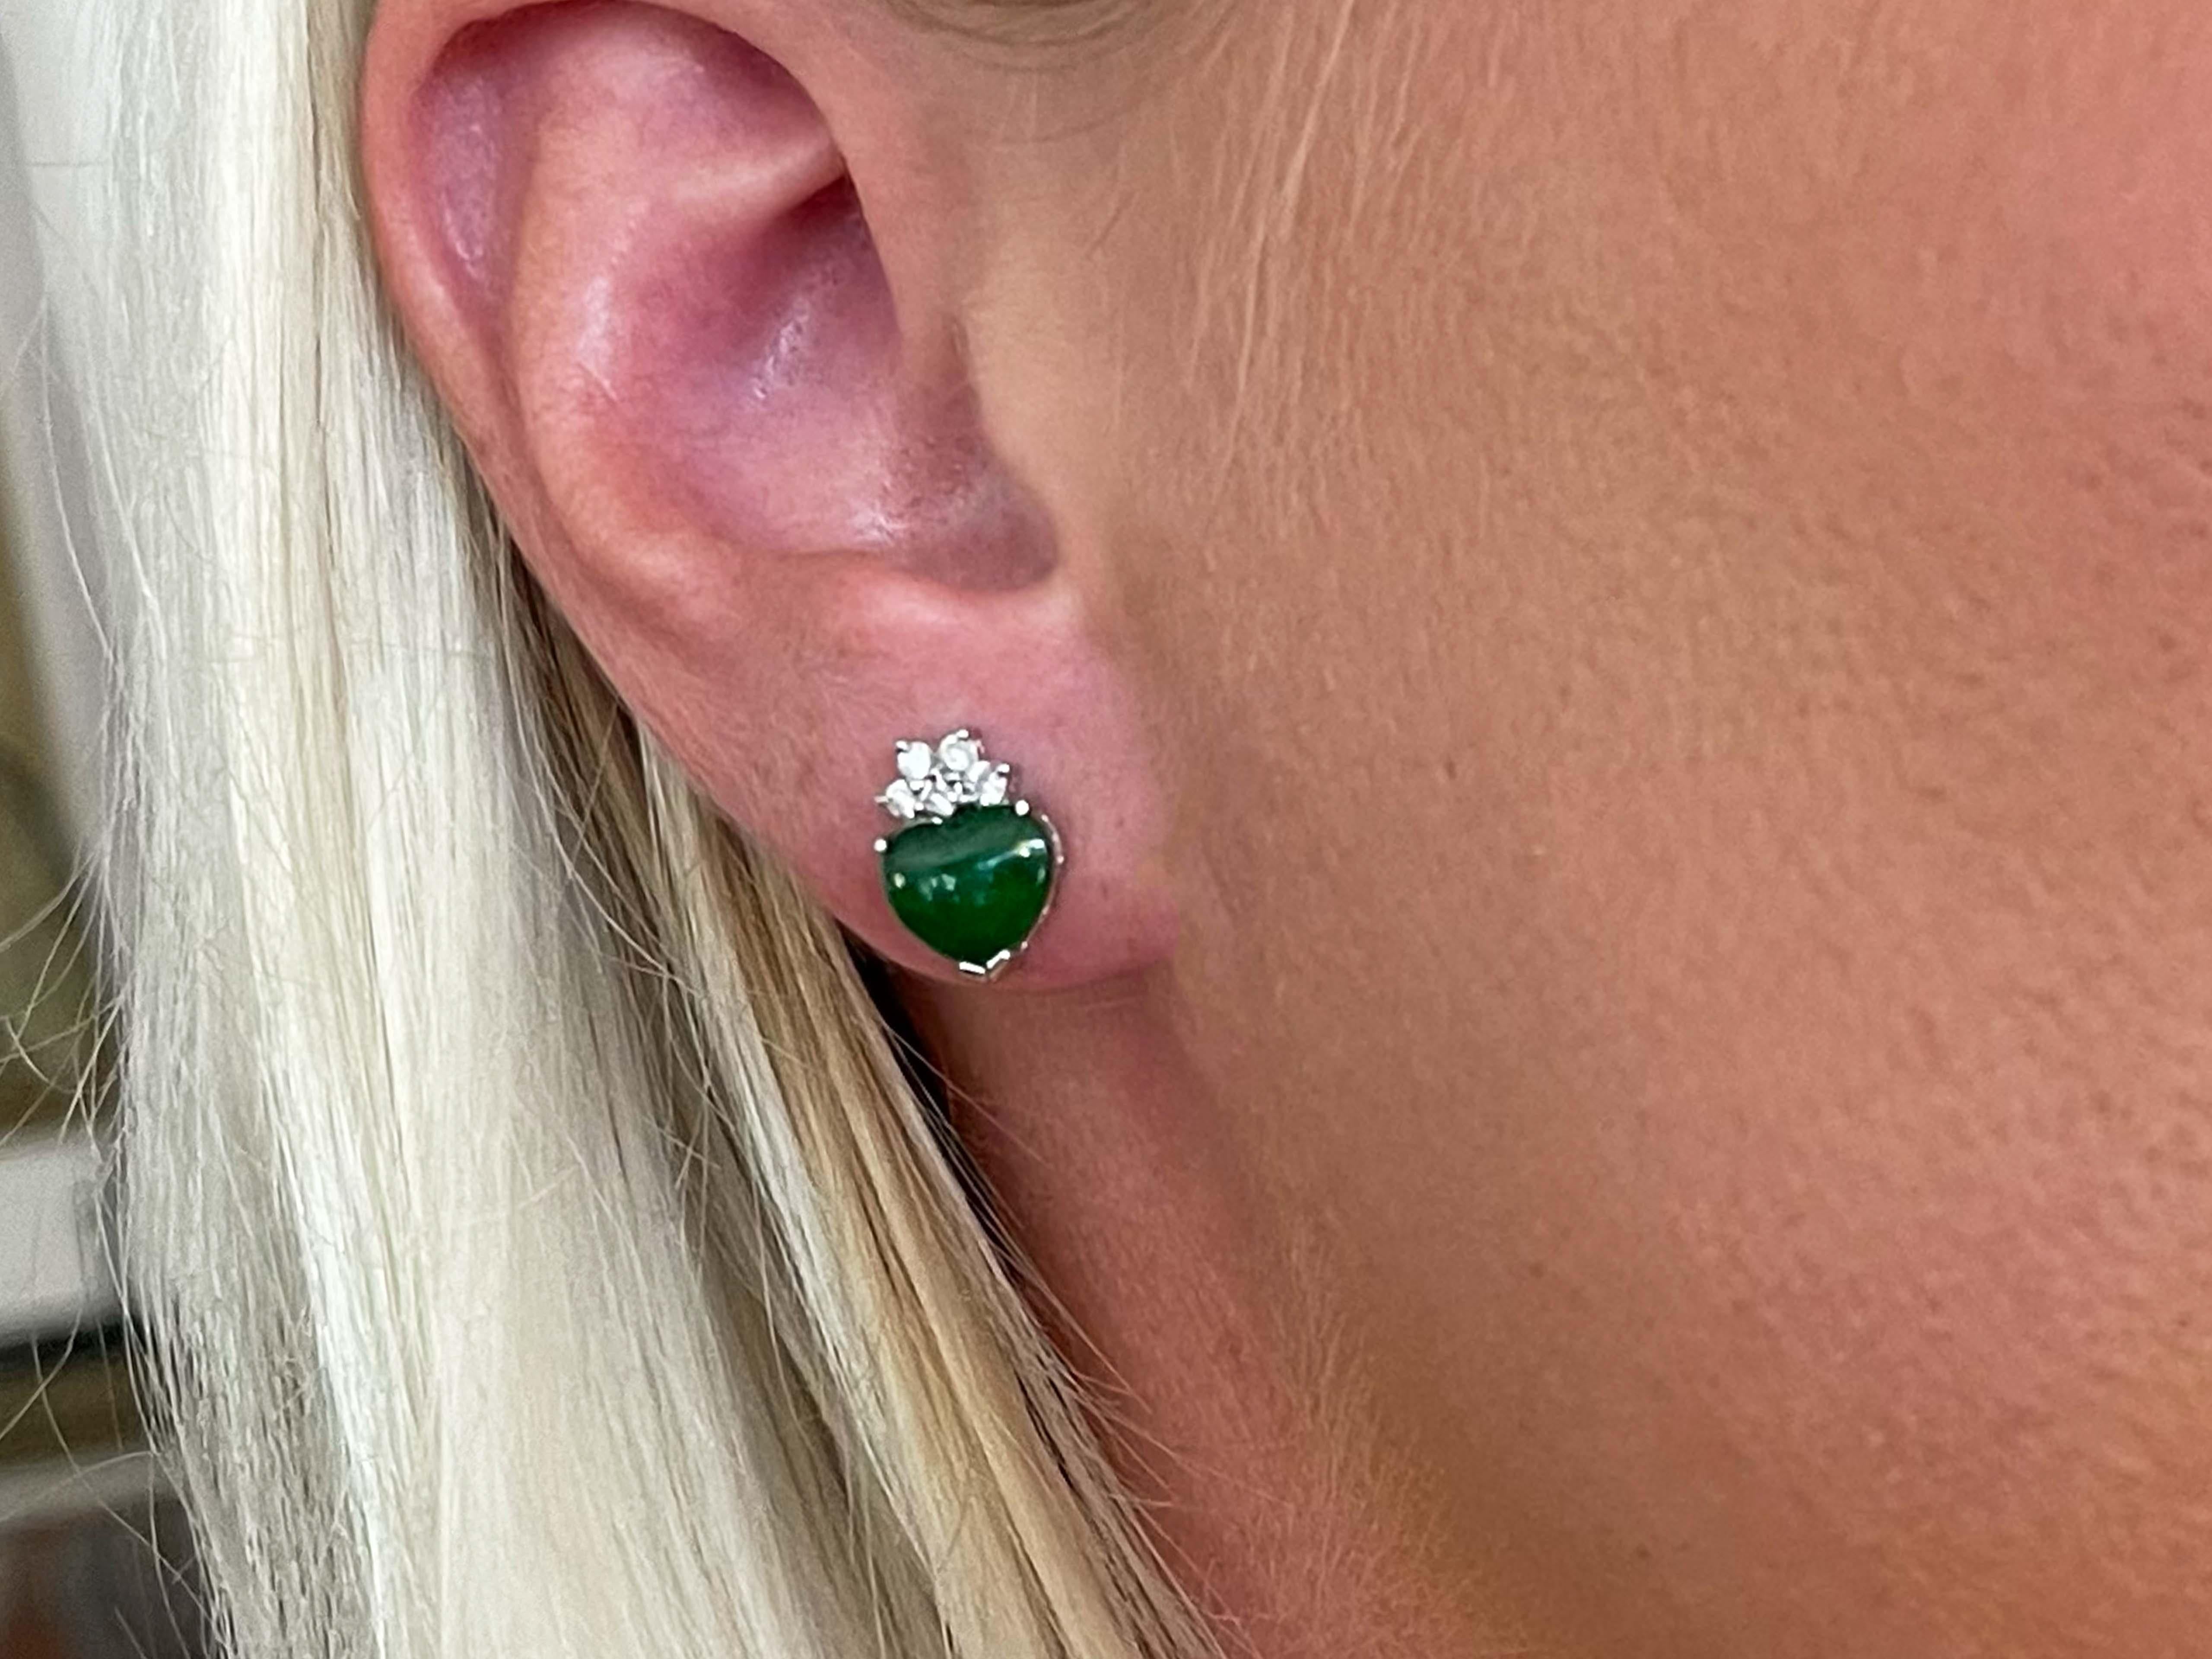 Earrings Specifications:

Metal: 18K White Gold

Total Weight: 2.5 Grams

Jade Measurements: 8 x 7.5 mm
​
​Diamond Count: 10
​
Diamond Color: G
​
​Diamond Clarity: VS
​
​Diamond Carat Weight: 0.25

Stamped: 